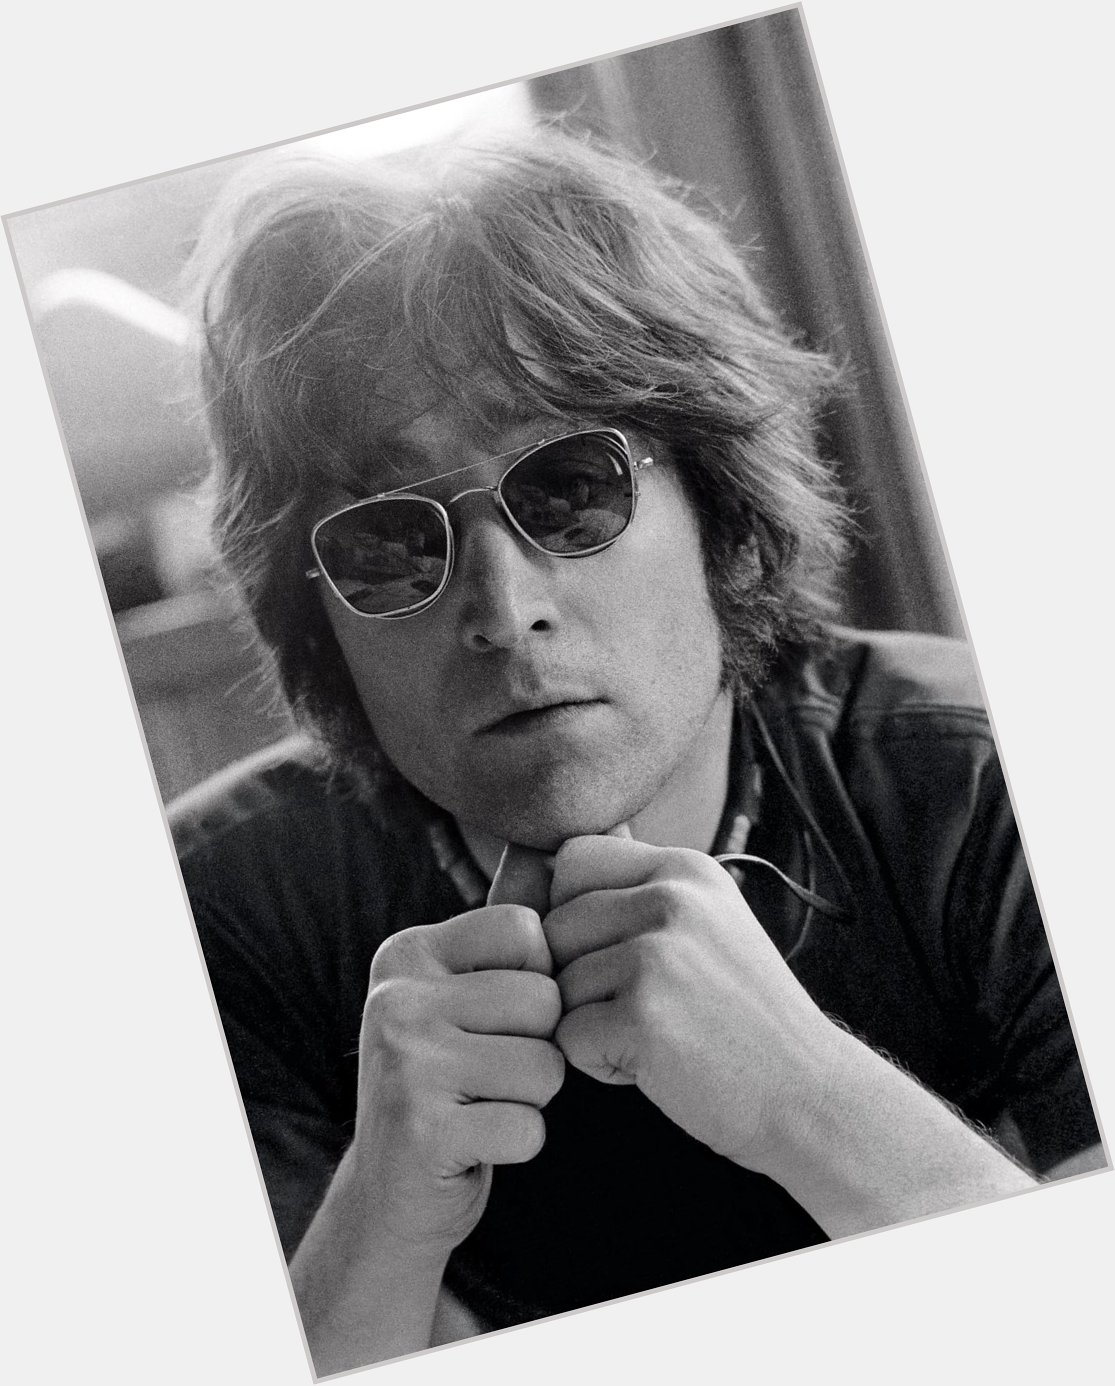 Happy Birthday John Lennon! He would have been 82 today. What s your favourite Lennon song? 